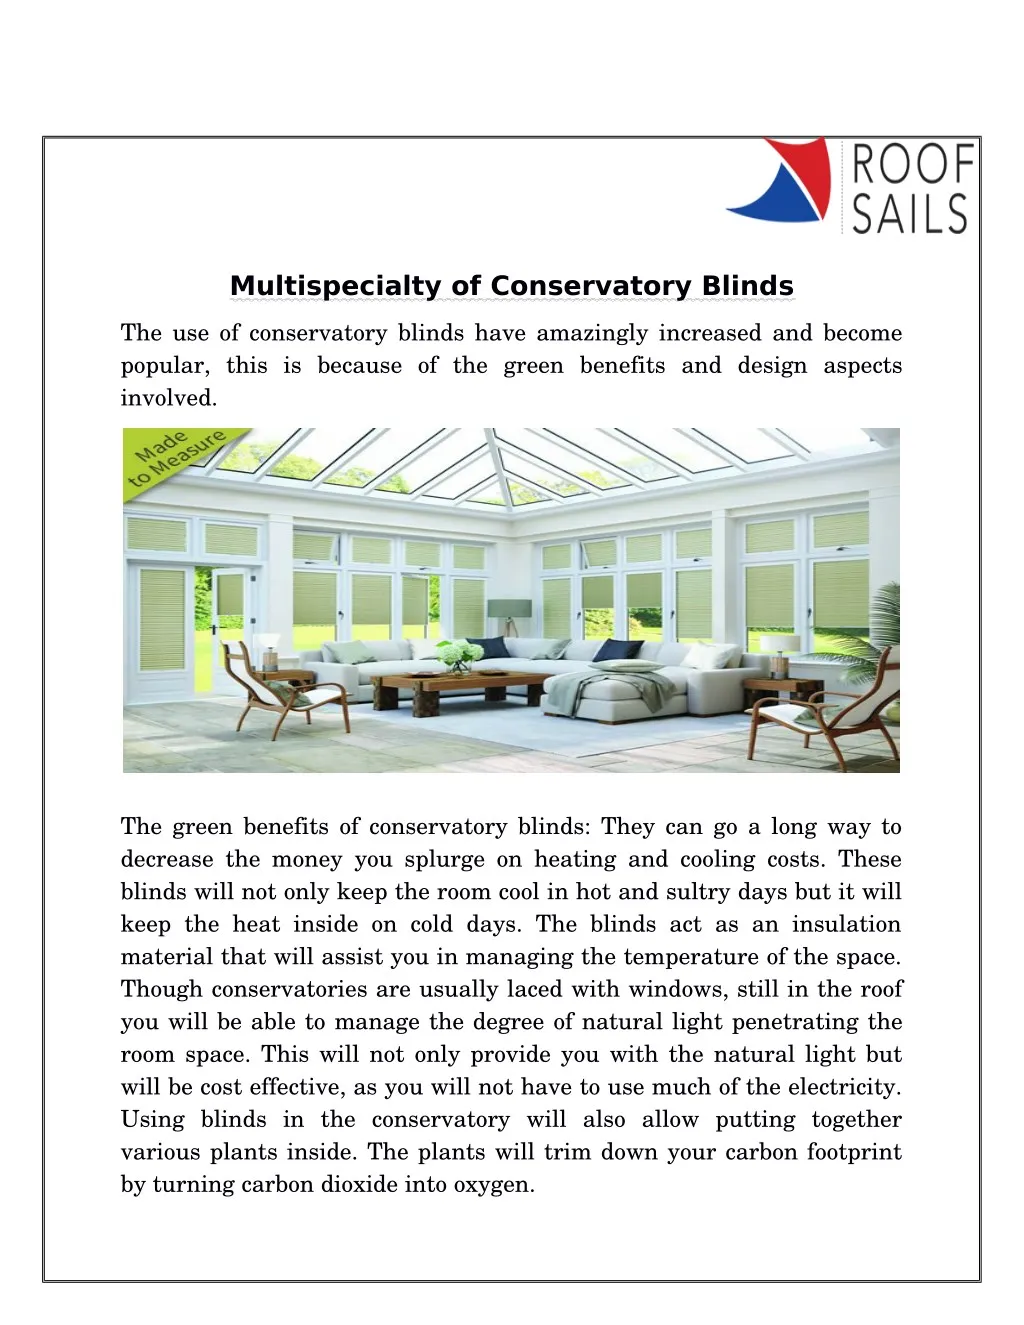 multispecialty of conservatory blinds